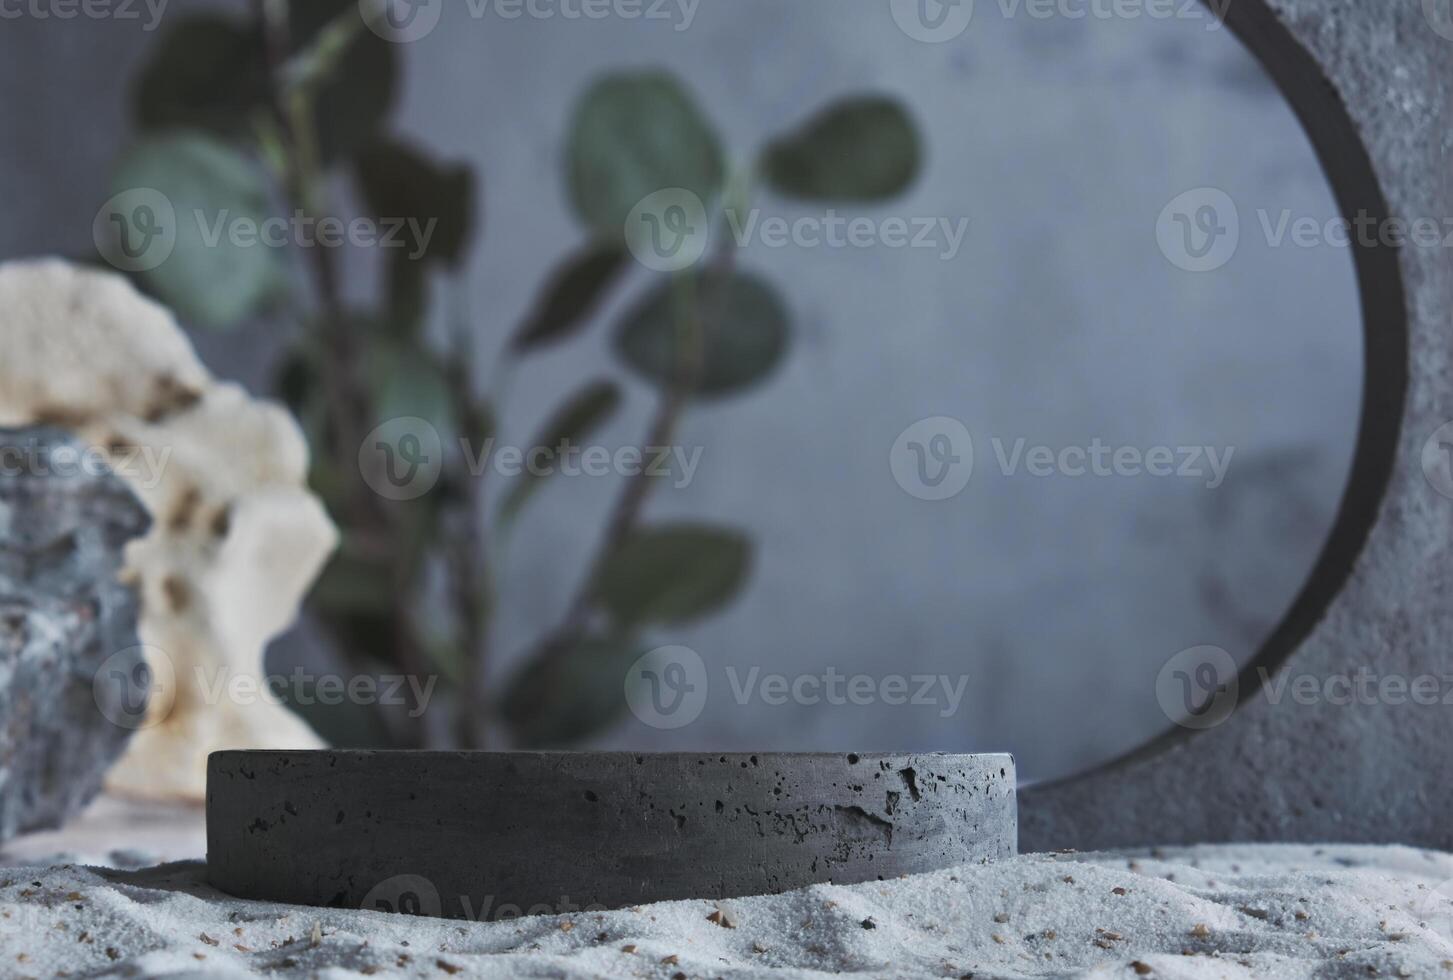 Background for cosmetic products grey concrete scene with geometric shape and natural rocks and leaves. Concrete grey podium. Empty showcase for packaging product presentation. Mock up pedestal photo